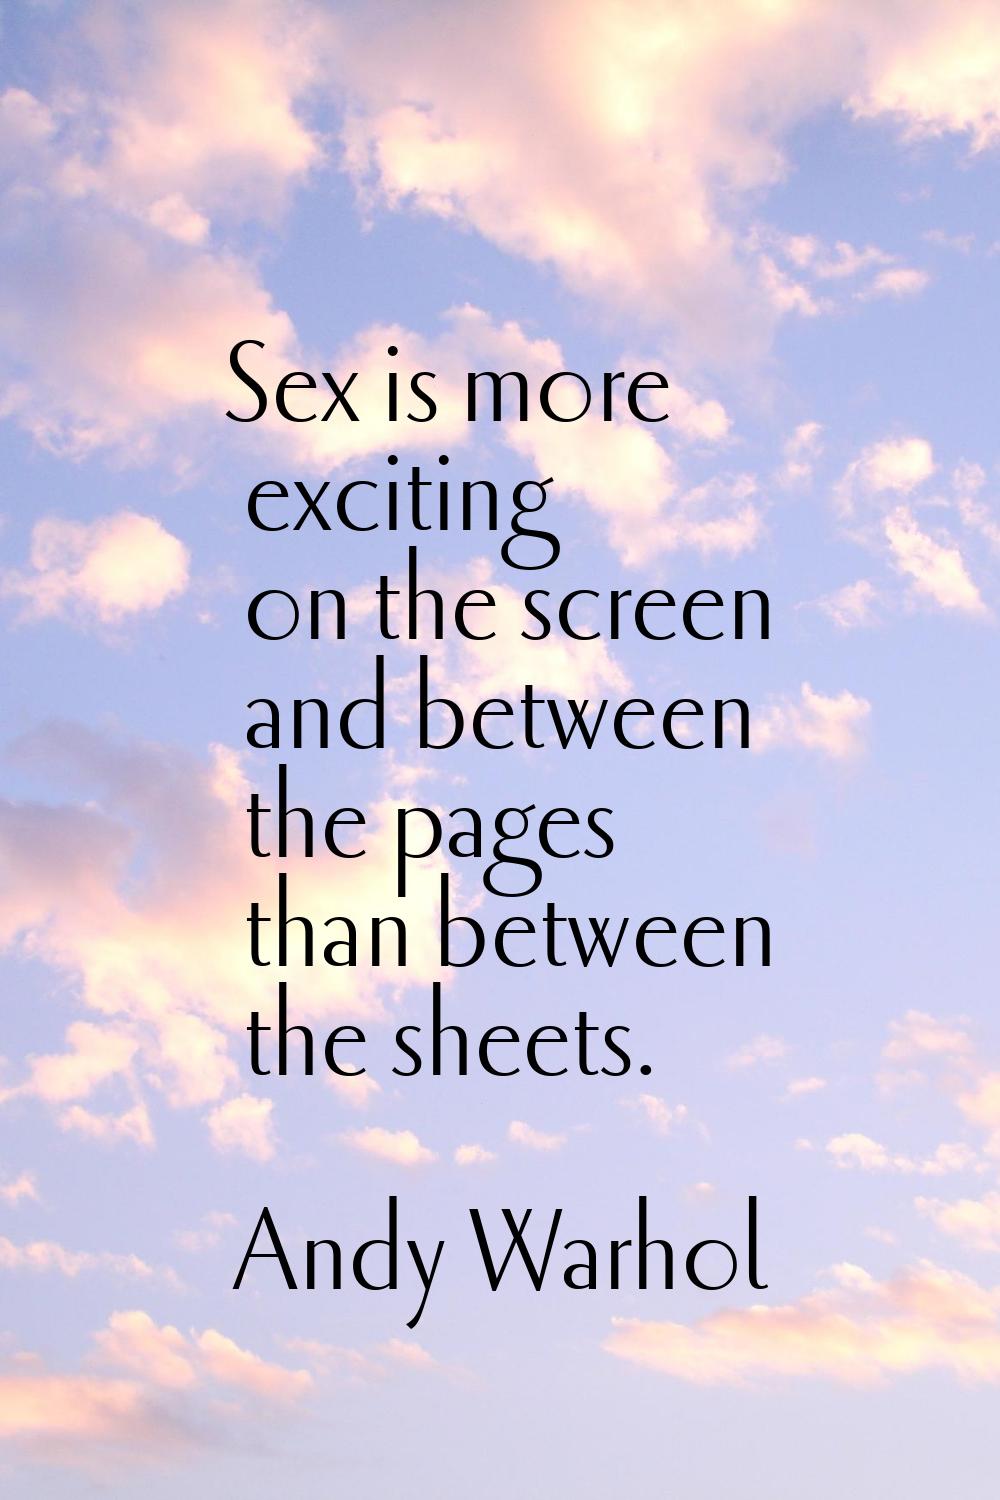 Sex is more exciting on the screen and between the pages than between the sheets.